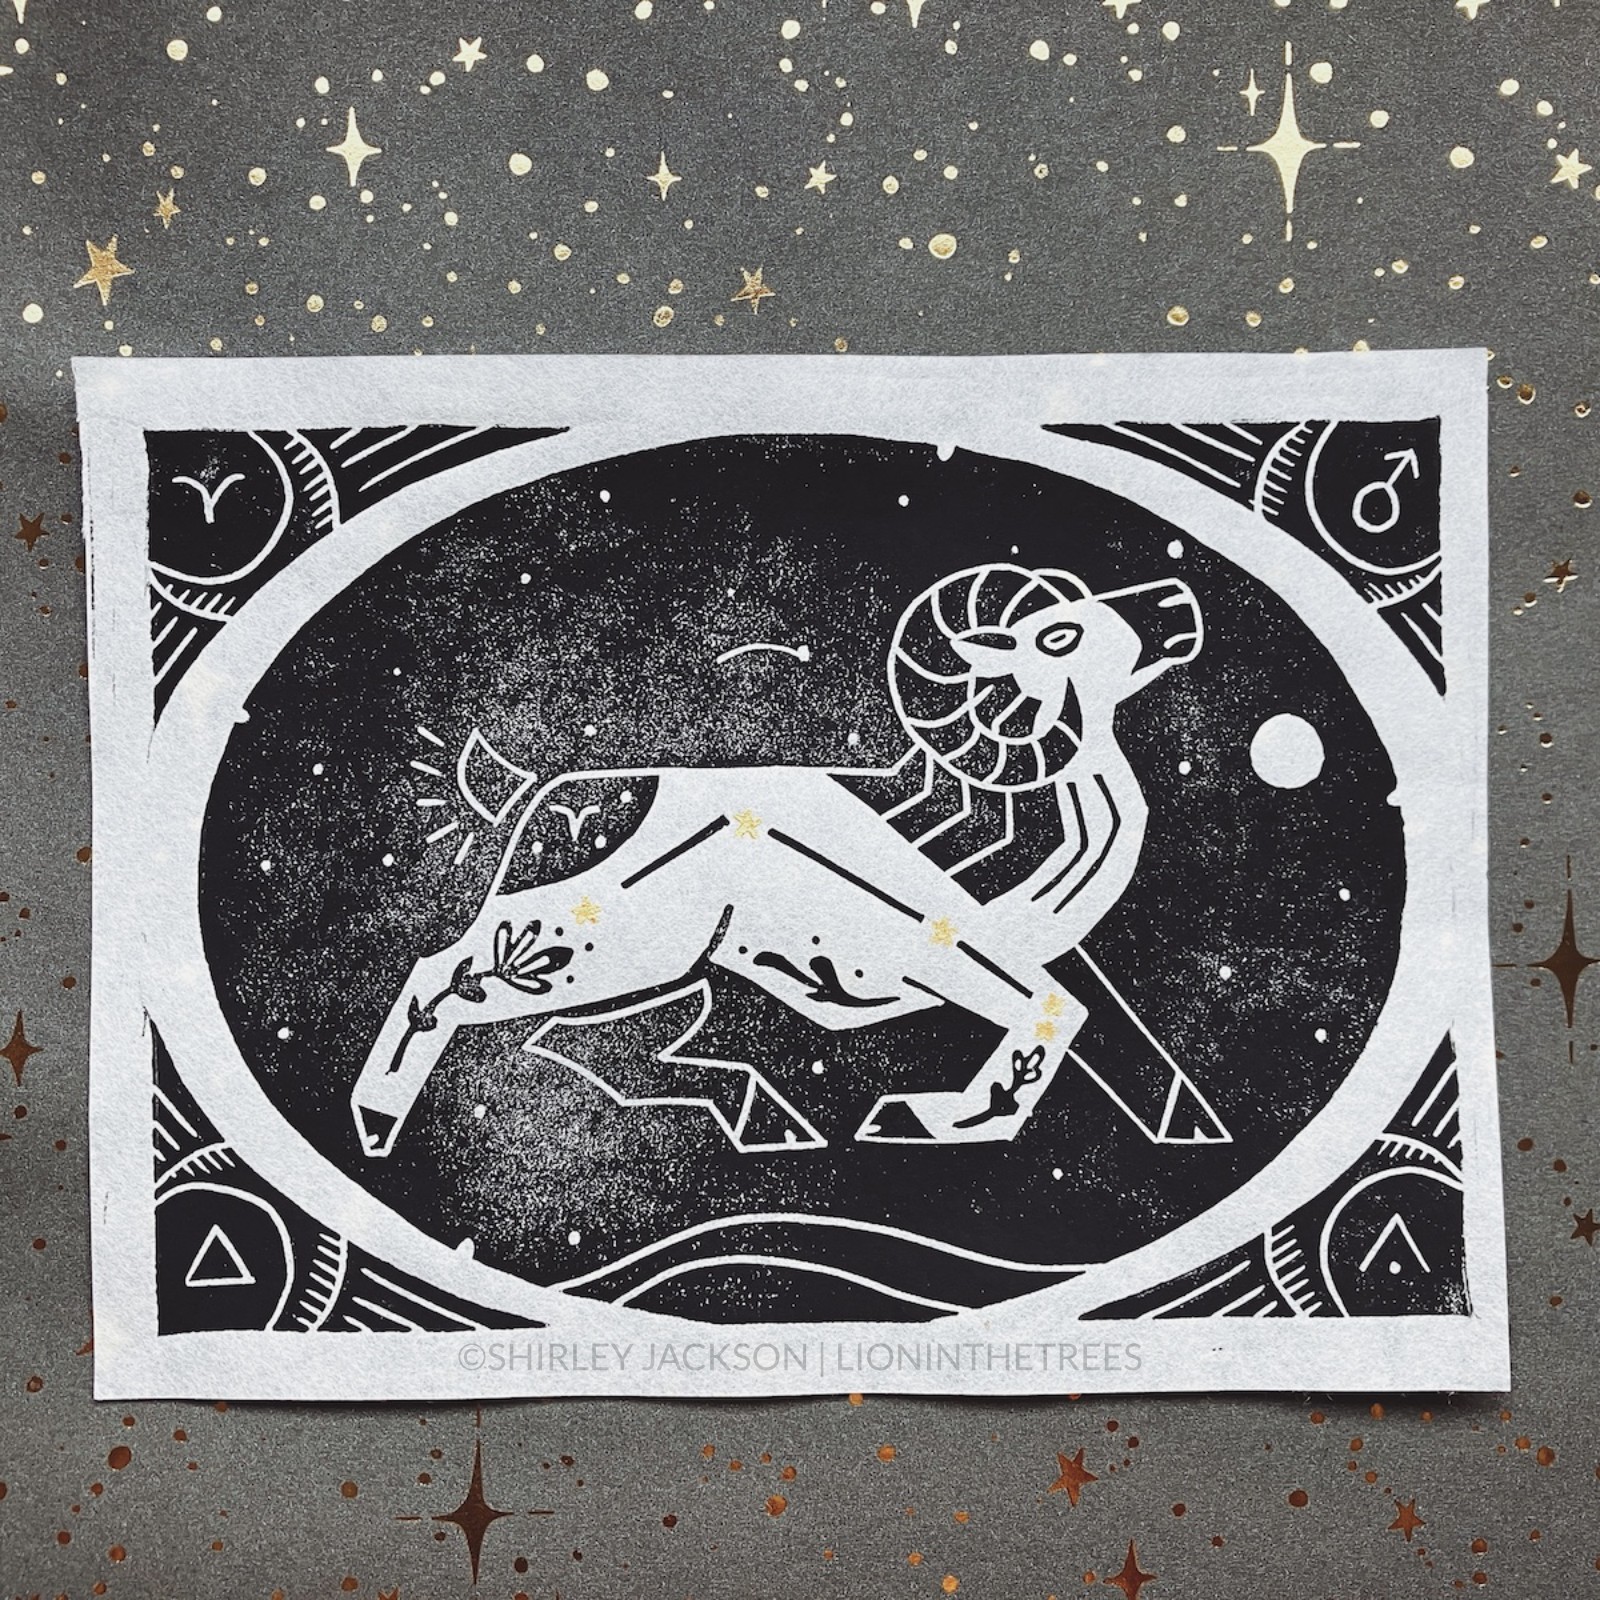 A black block print featuring the astrological sign of Aries as a Bighorn Sheep with the constellation hand-painted with gold stars on the sheep’s body. They are enclosed within an oval that has stars within it, and a border that has symbolic signs that coordinate with Aries.